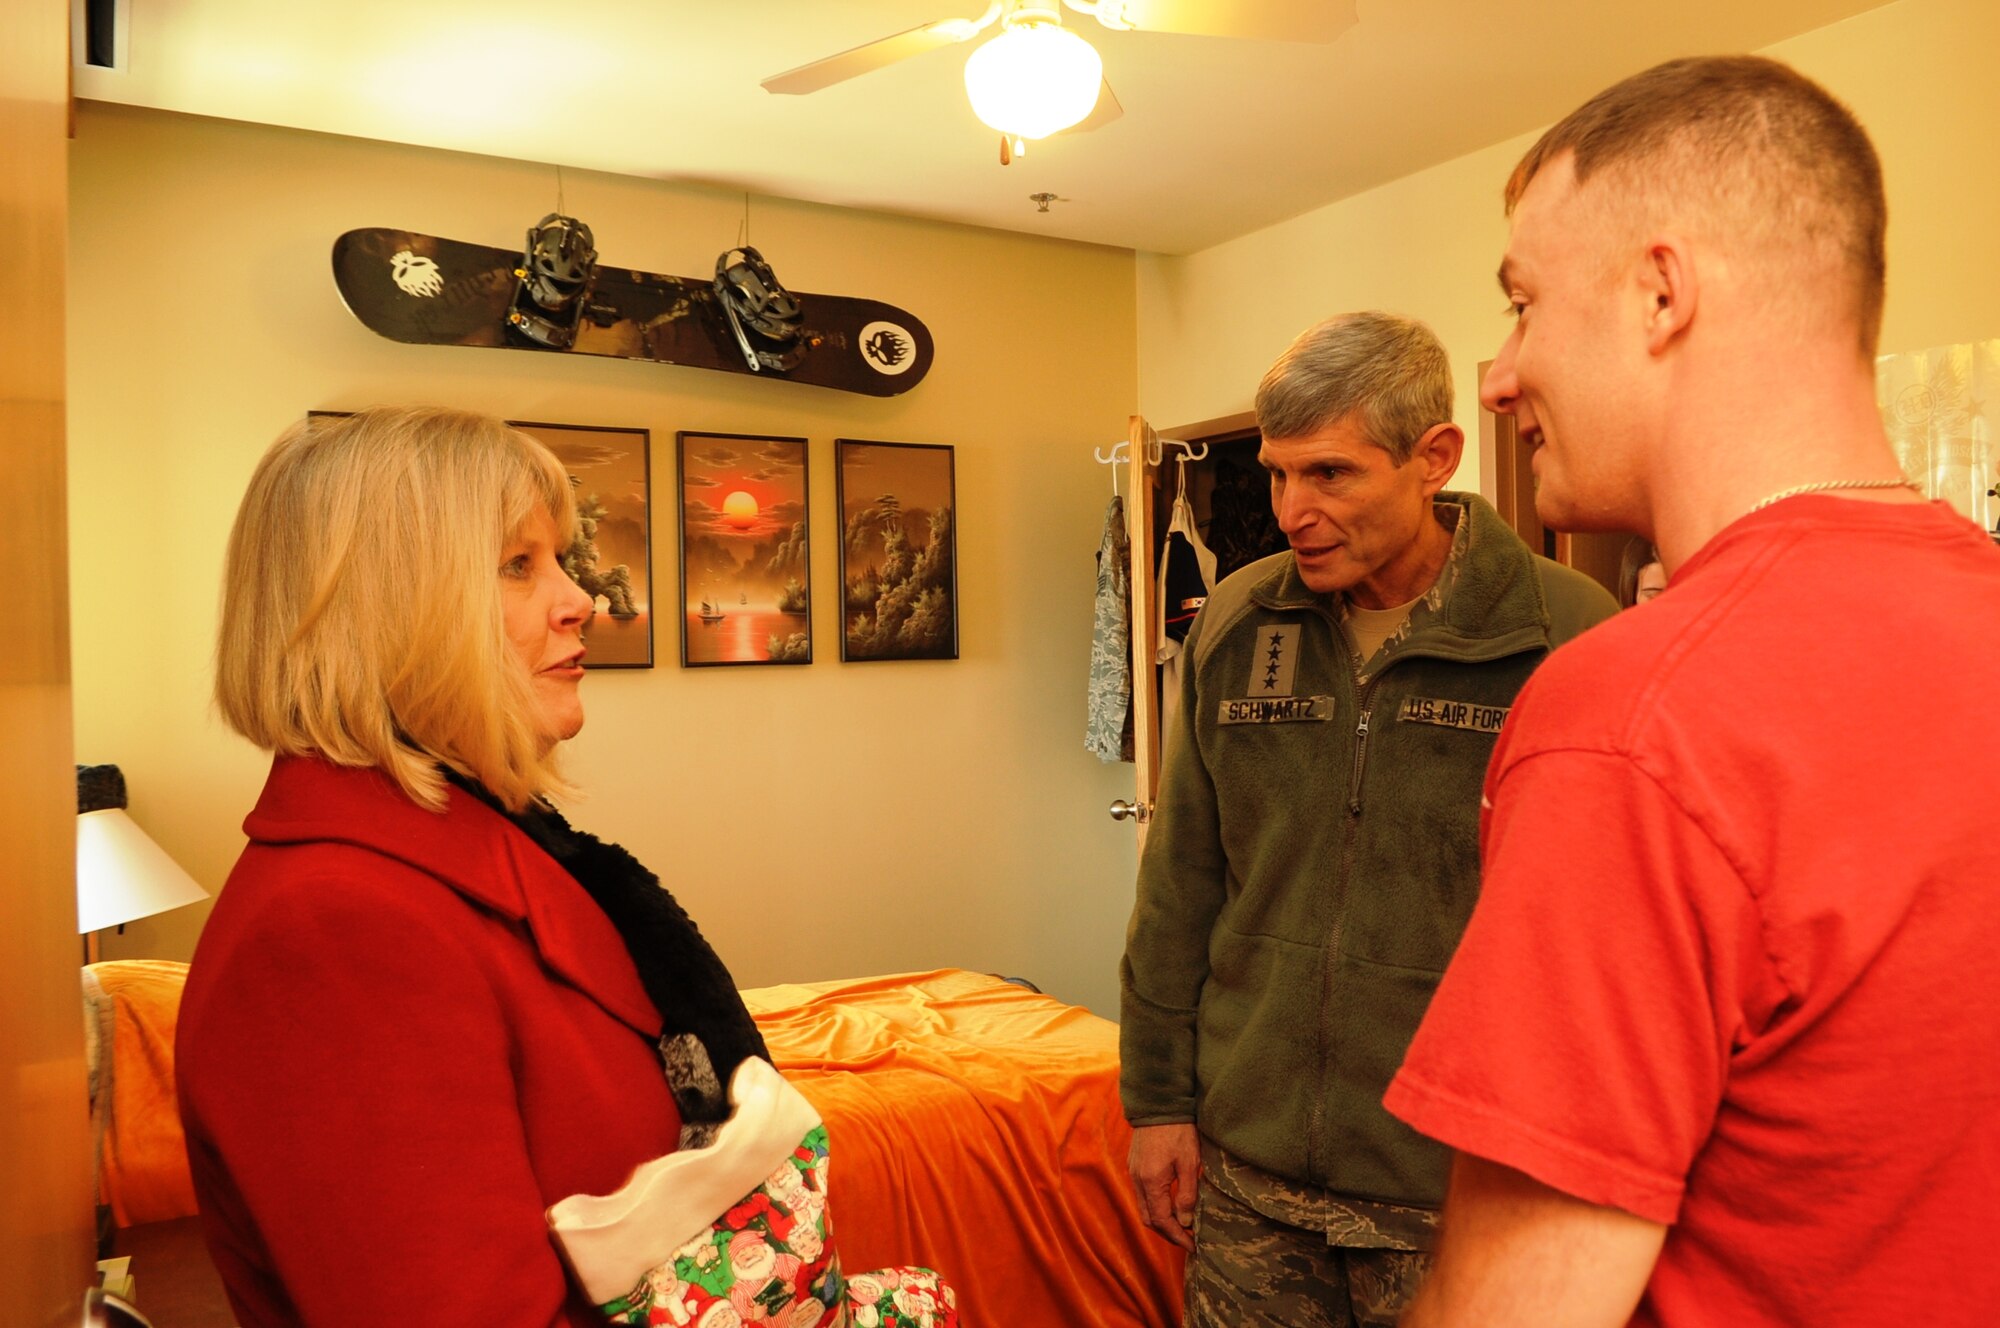 Air Force Chief of Staff Gen. Norton Schwartz and his wife Suzie talk with Staff Sgt. Trinity Hayes, 8th Maintenance Squadron, during a visit to the dormitories at Kunsan Air Base, Republic of Korea, Dec. 24, 2011. The couple visited the dorms at Kunsan to see first-hand the quality of life and living conditions for Airmen stationed at Kunsan. (U.S. Air Force photo by Master Sgt. Sonny Cohrs/Released)